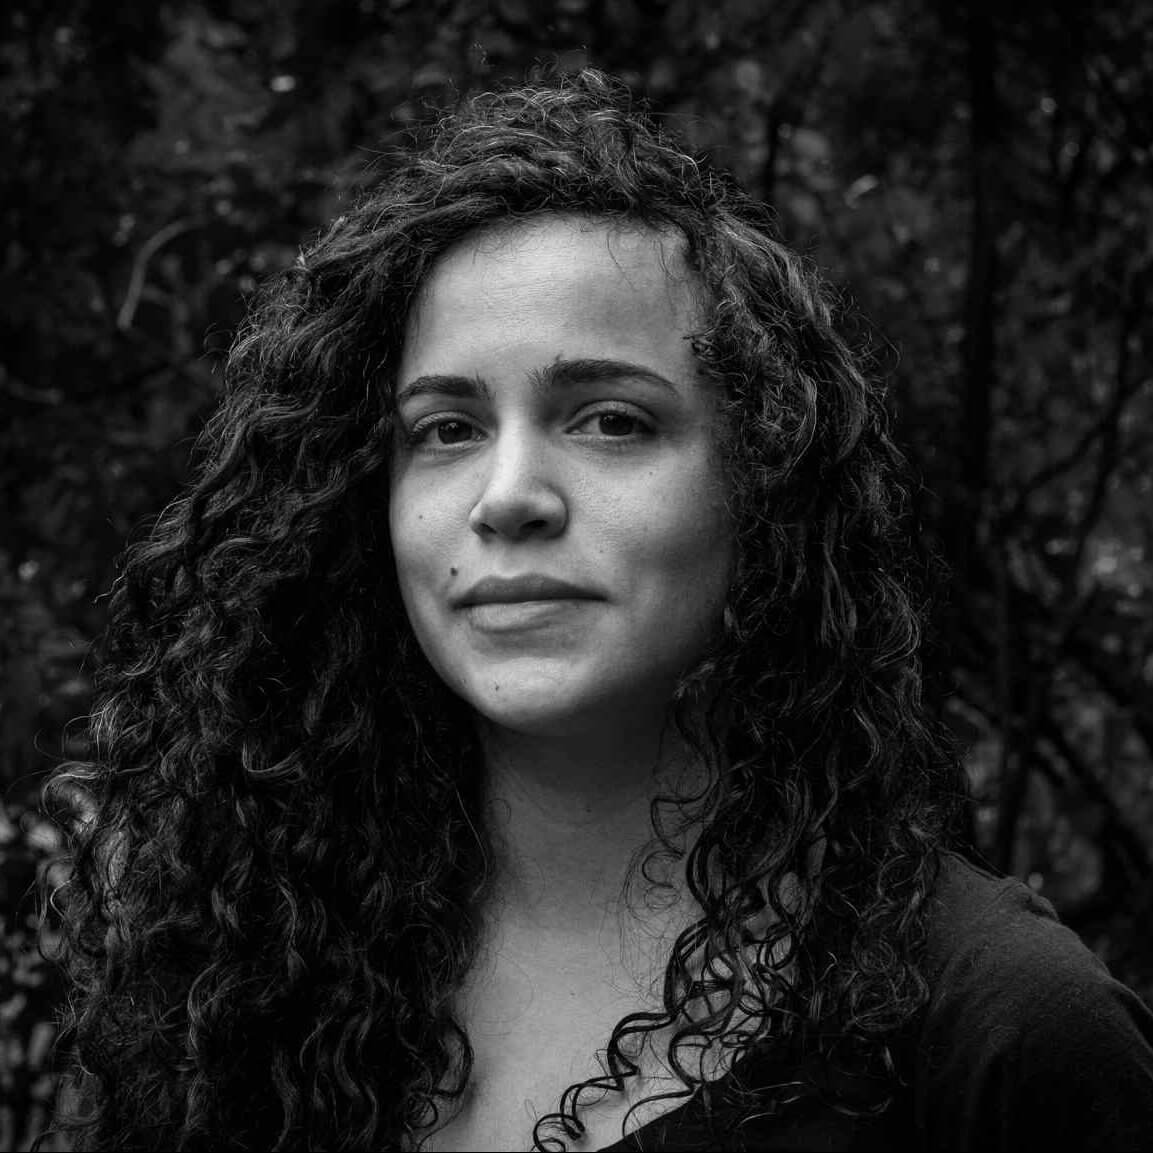 One of the producers for Matininó, a woman with curly long hair and a dark-colored shirt, poses for a black and white photo.